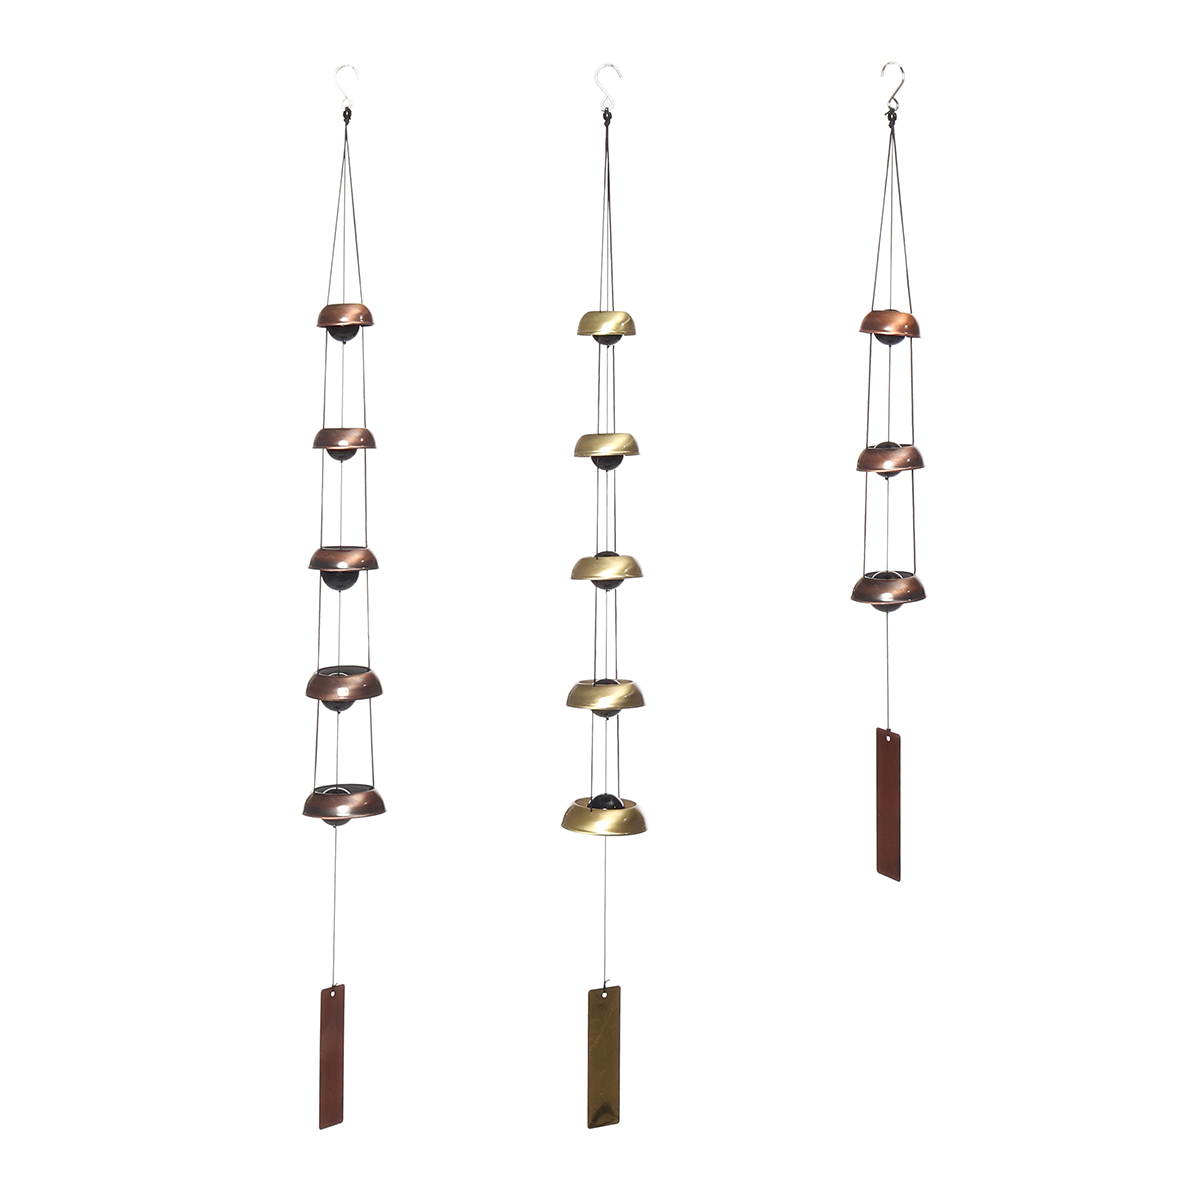 Suncatchers & Wind Chimes - Antirust Copper Wind Chimes Outdoor Living